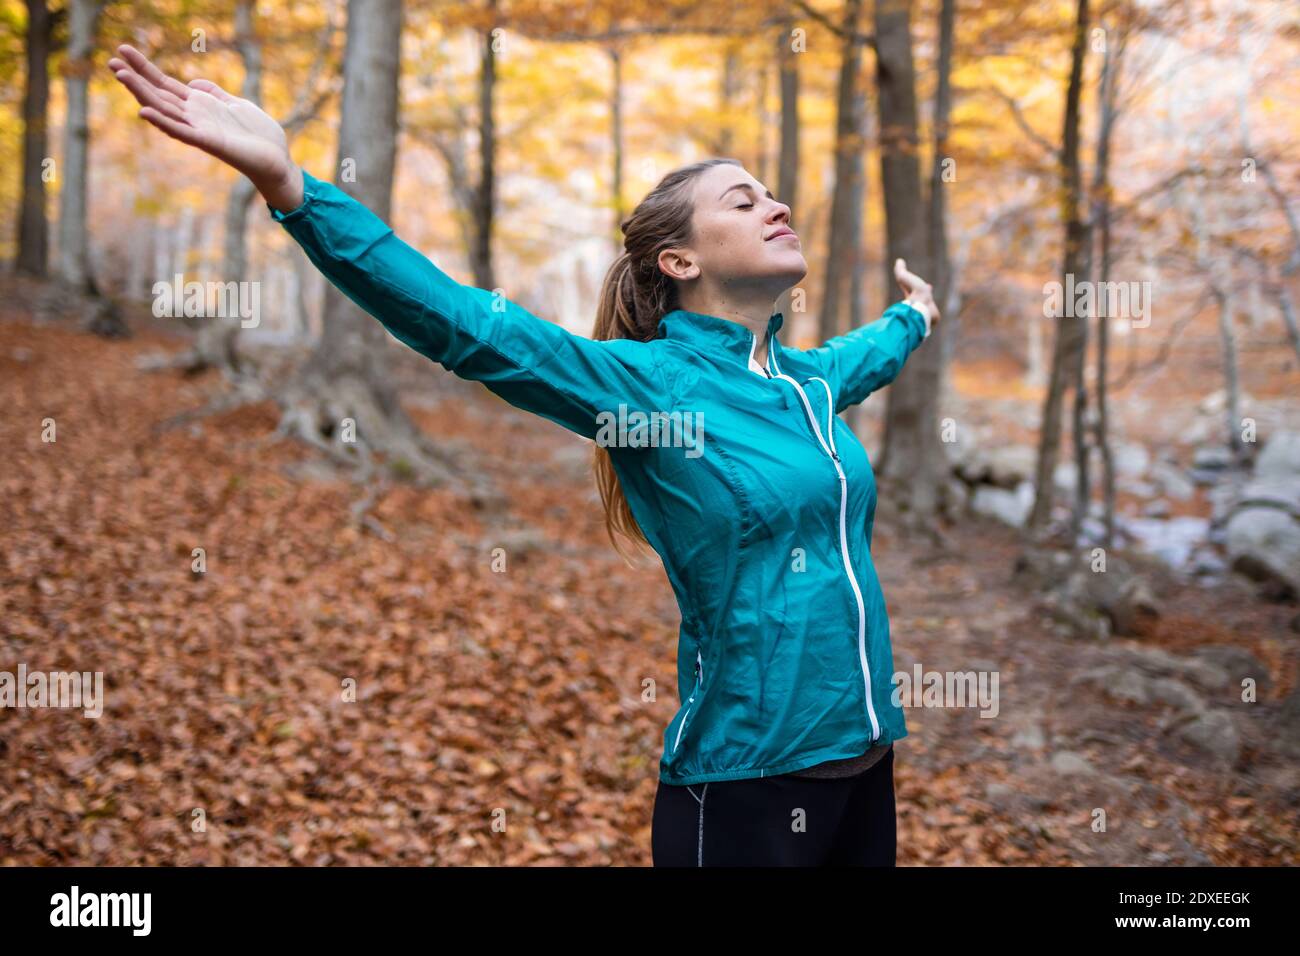 Carefree sportswoman with eyes closed and arms outstretched standing in forest Stock Photo